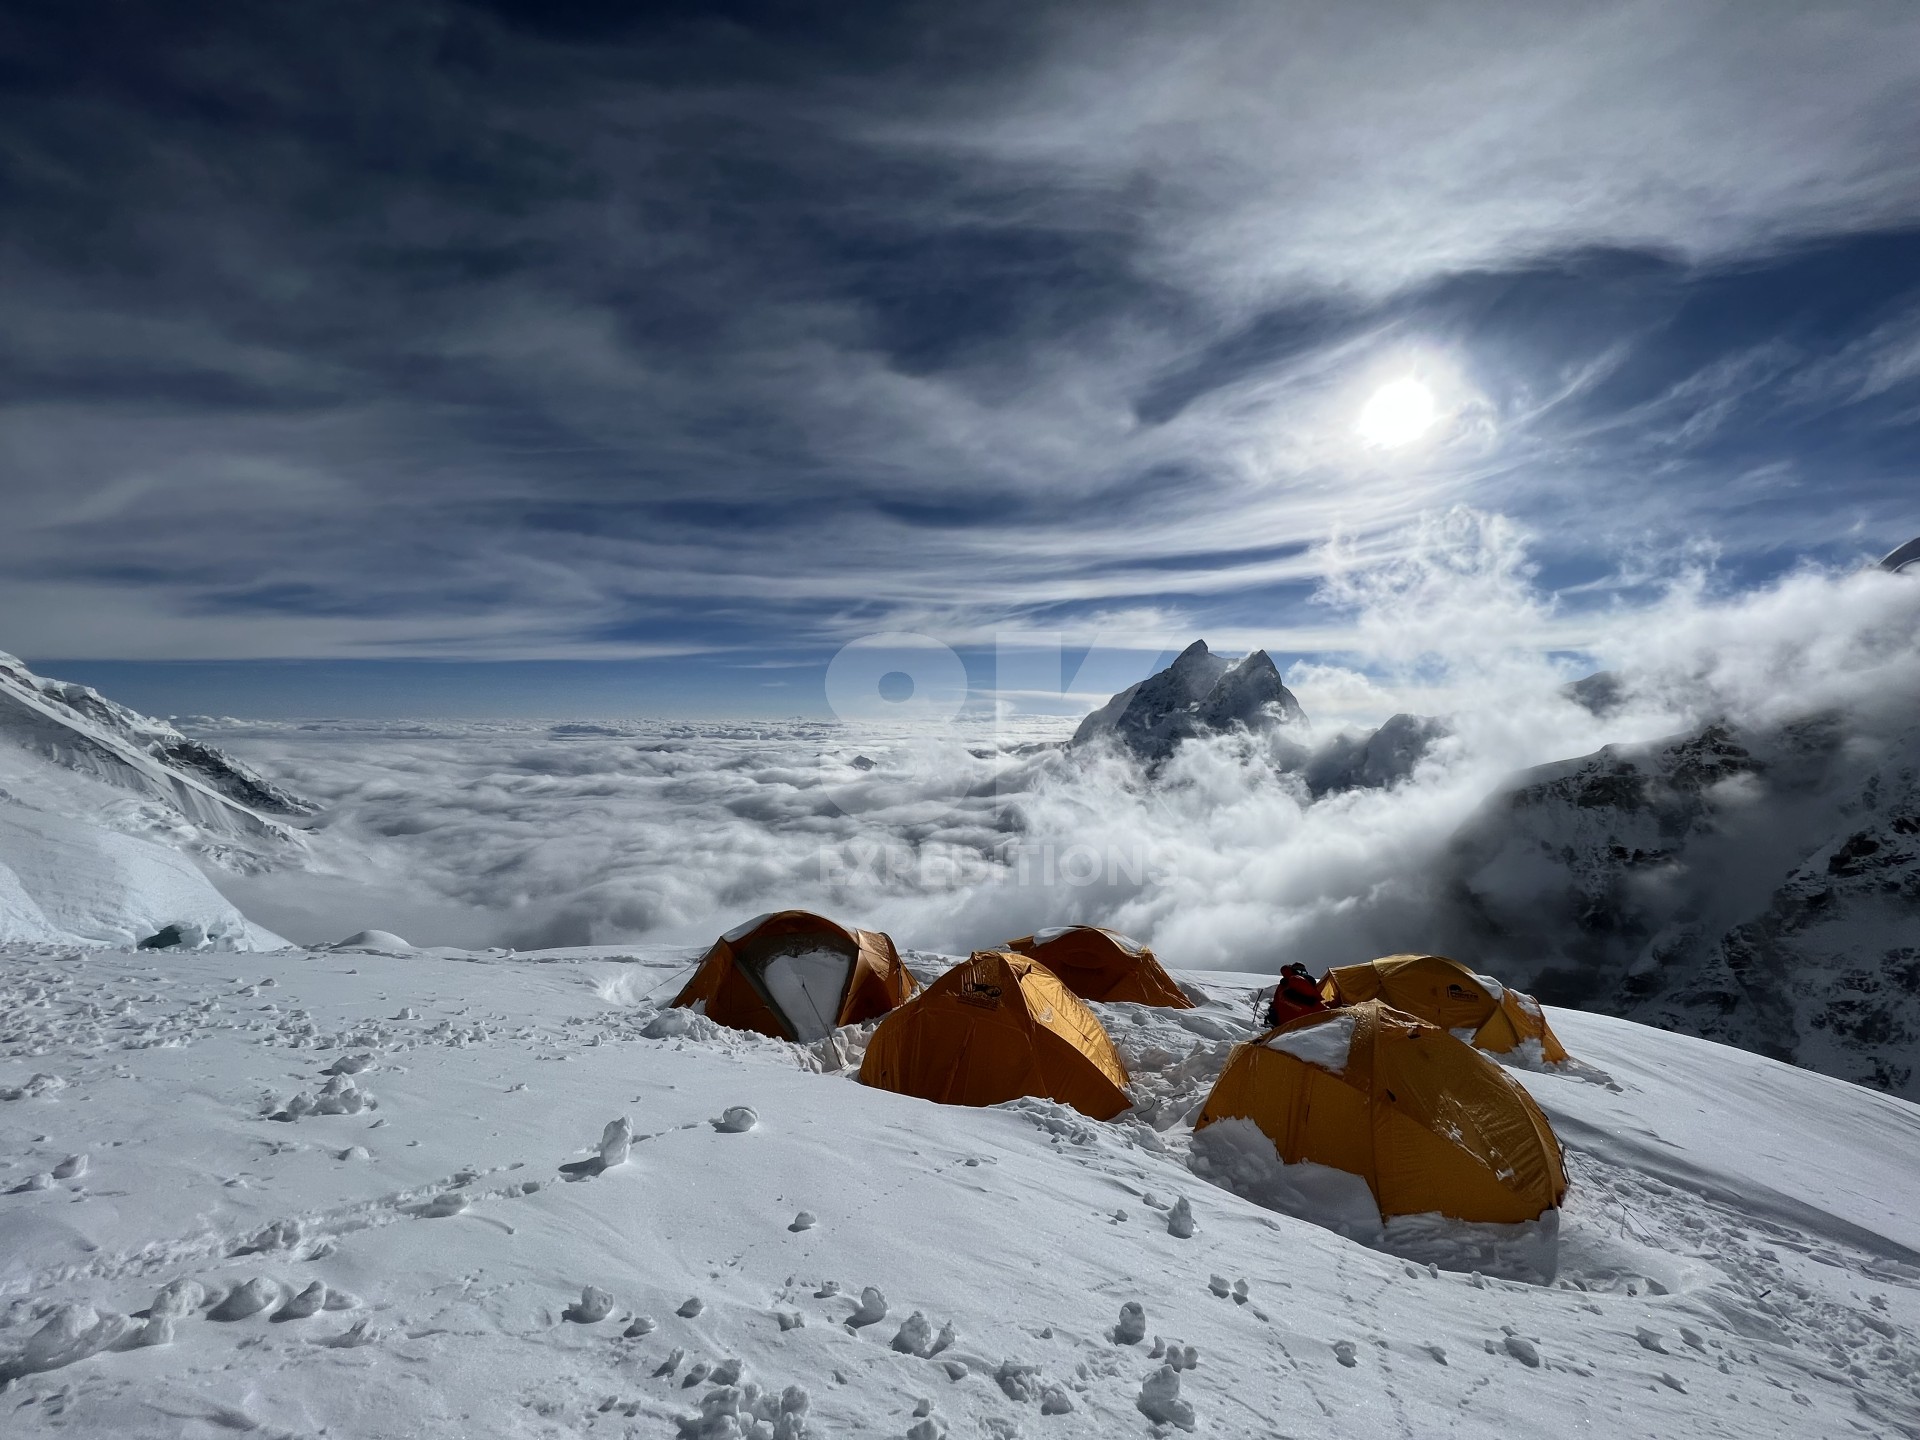 Kanchenjunga Expedition (8,586 M) | 3rd Highest Mountain In The World |